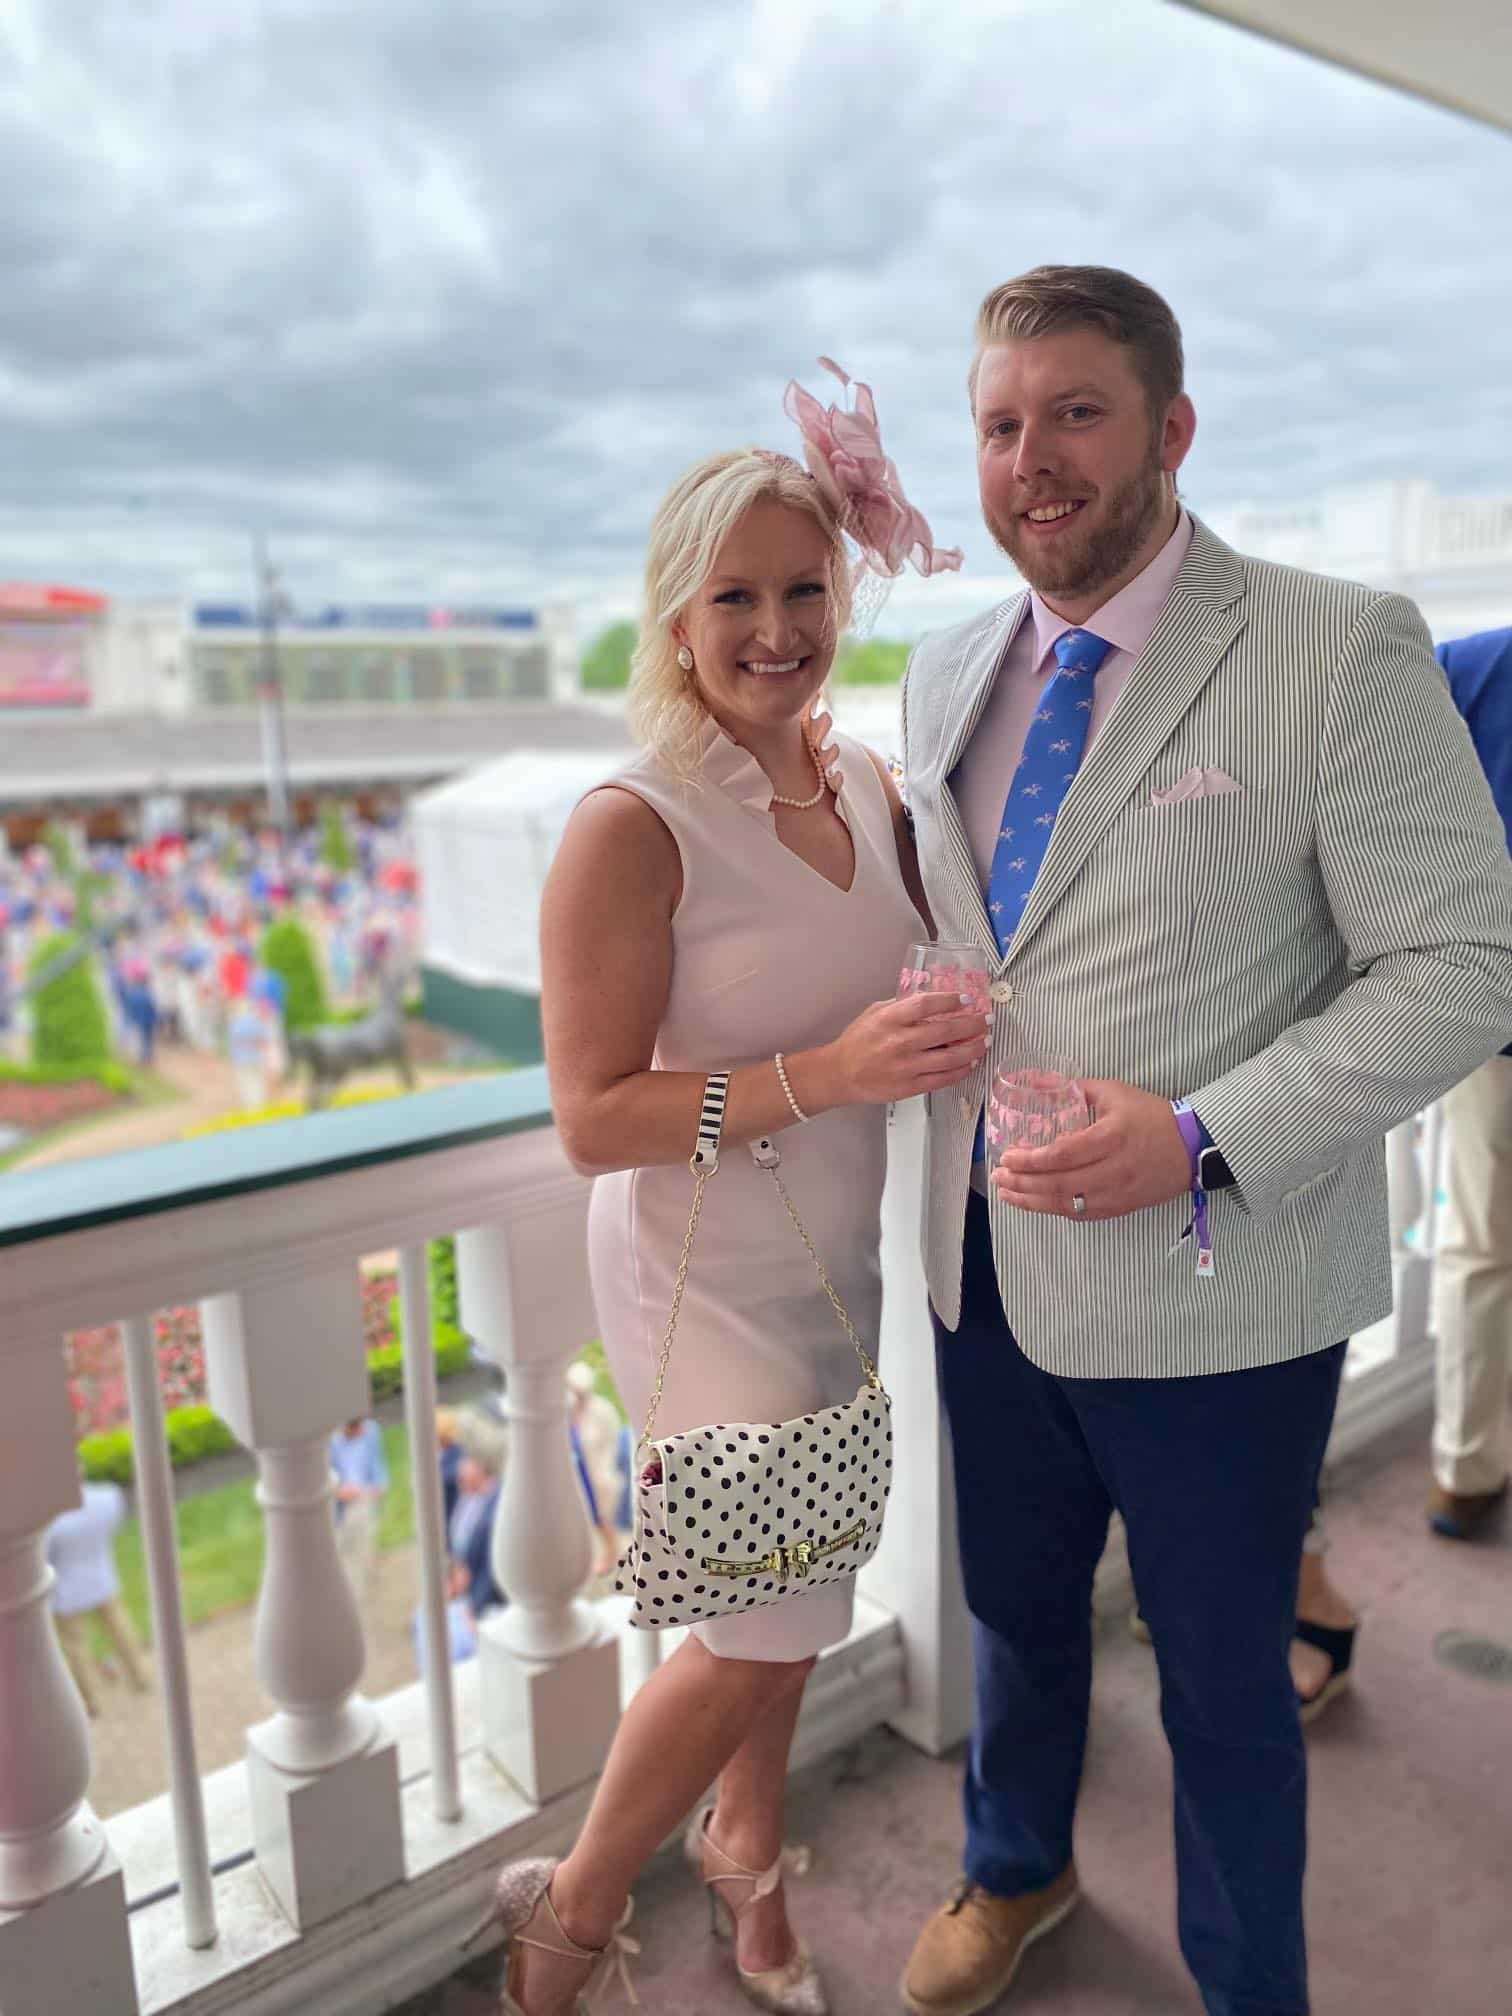 FCL team member, Jason, enjoying the Kentucky Derby with his date.